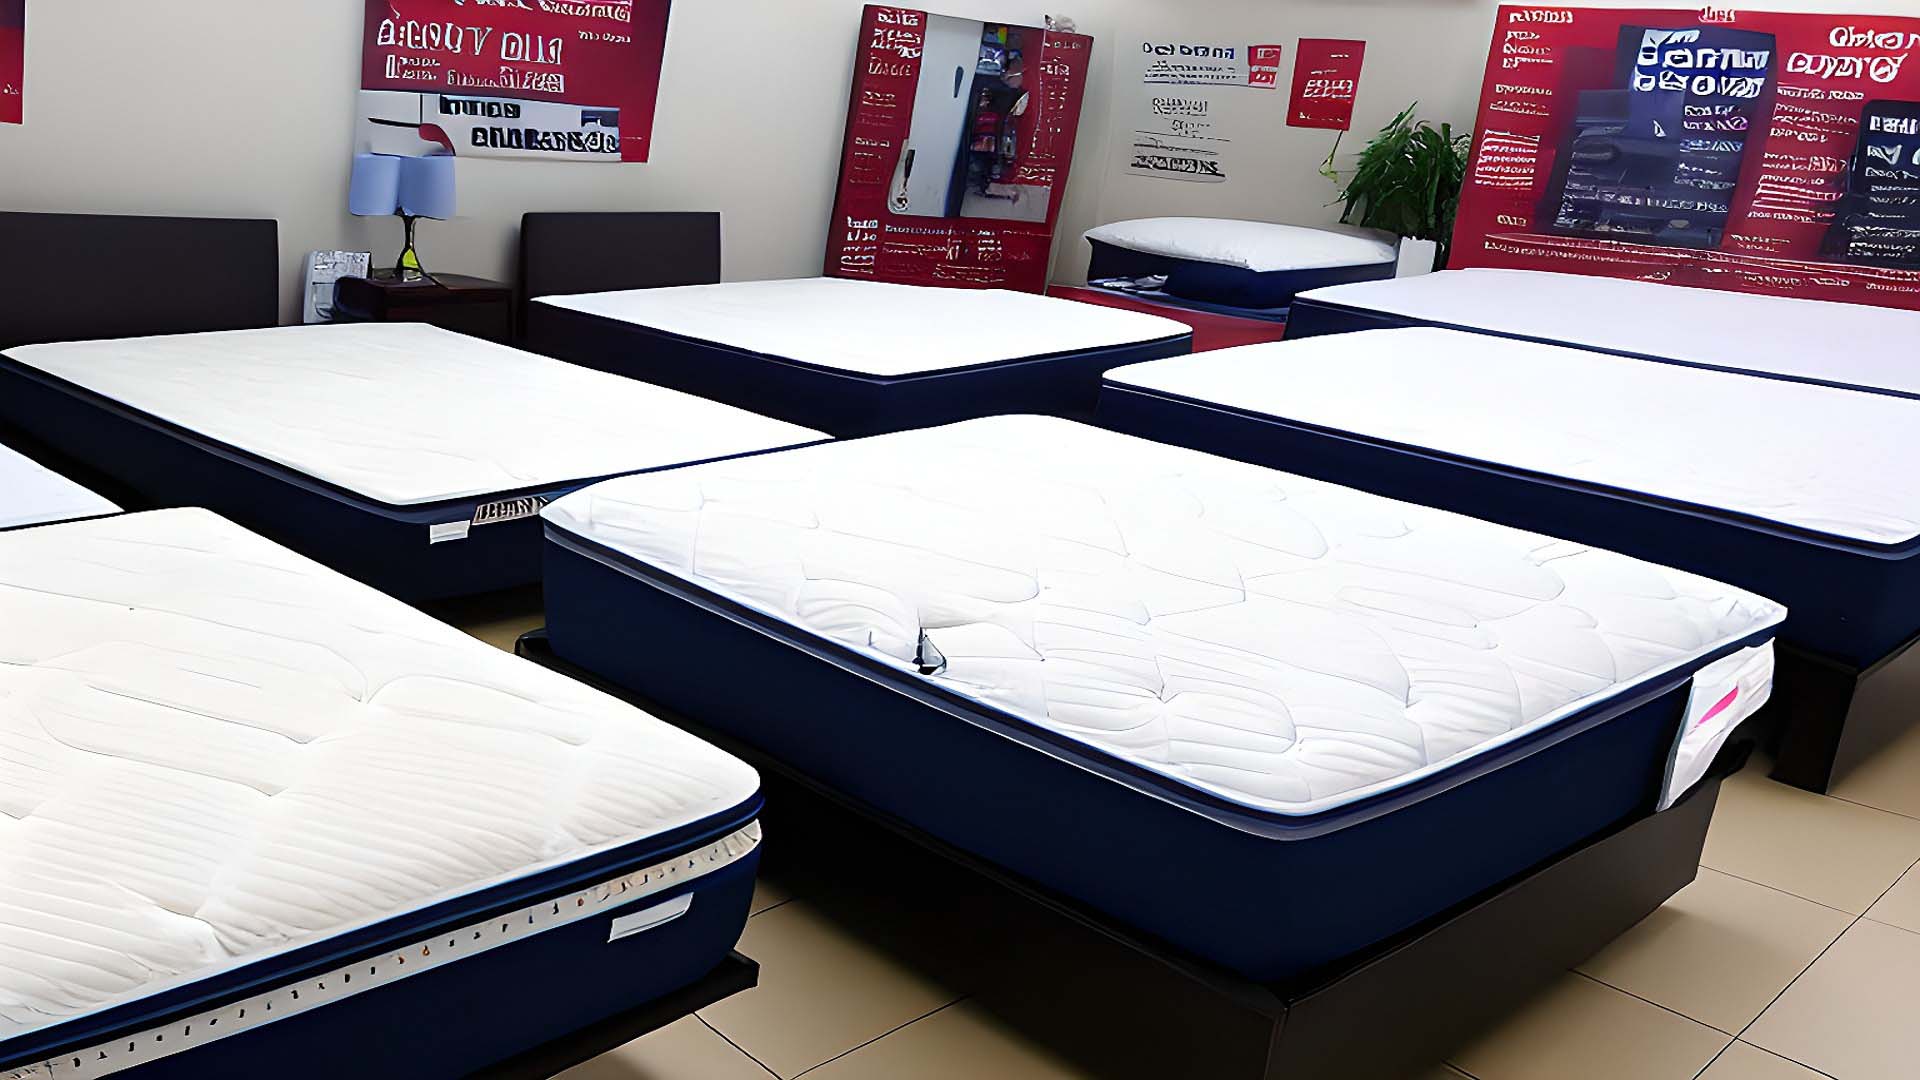 Mattress By Appointment in Antioch, California 94509